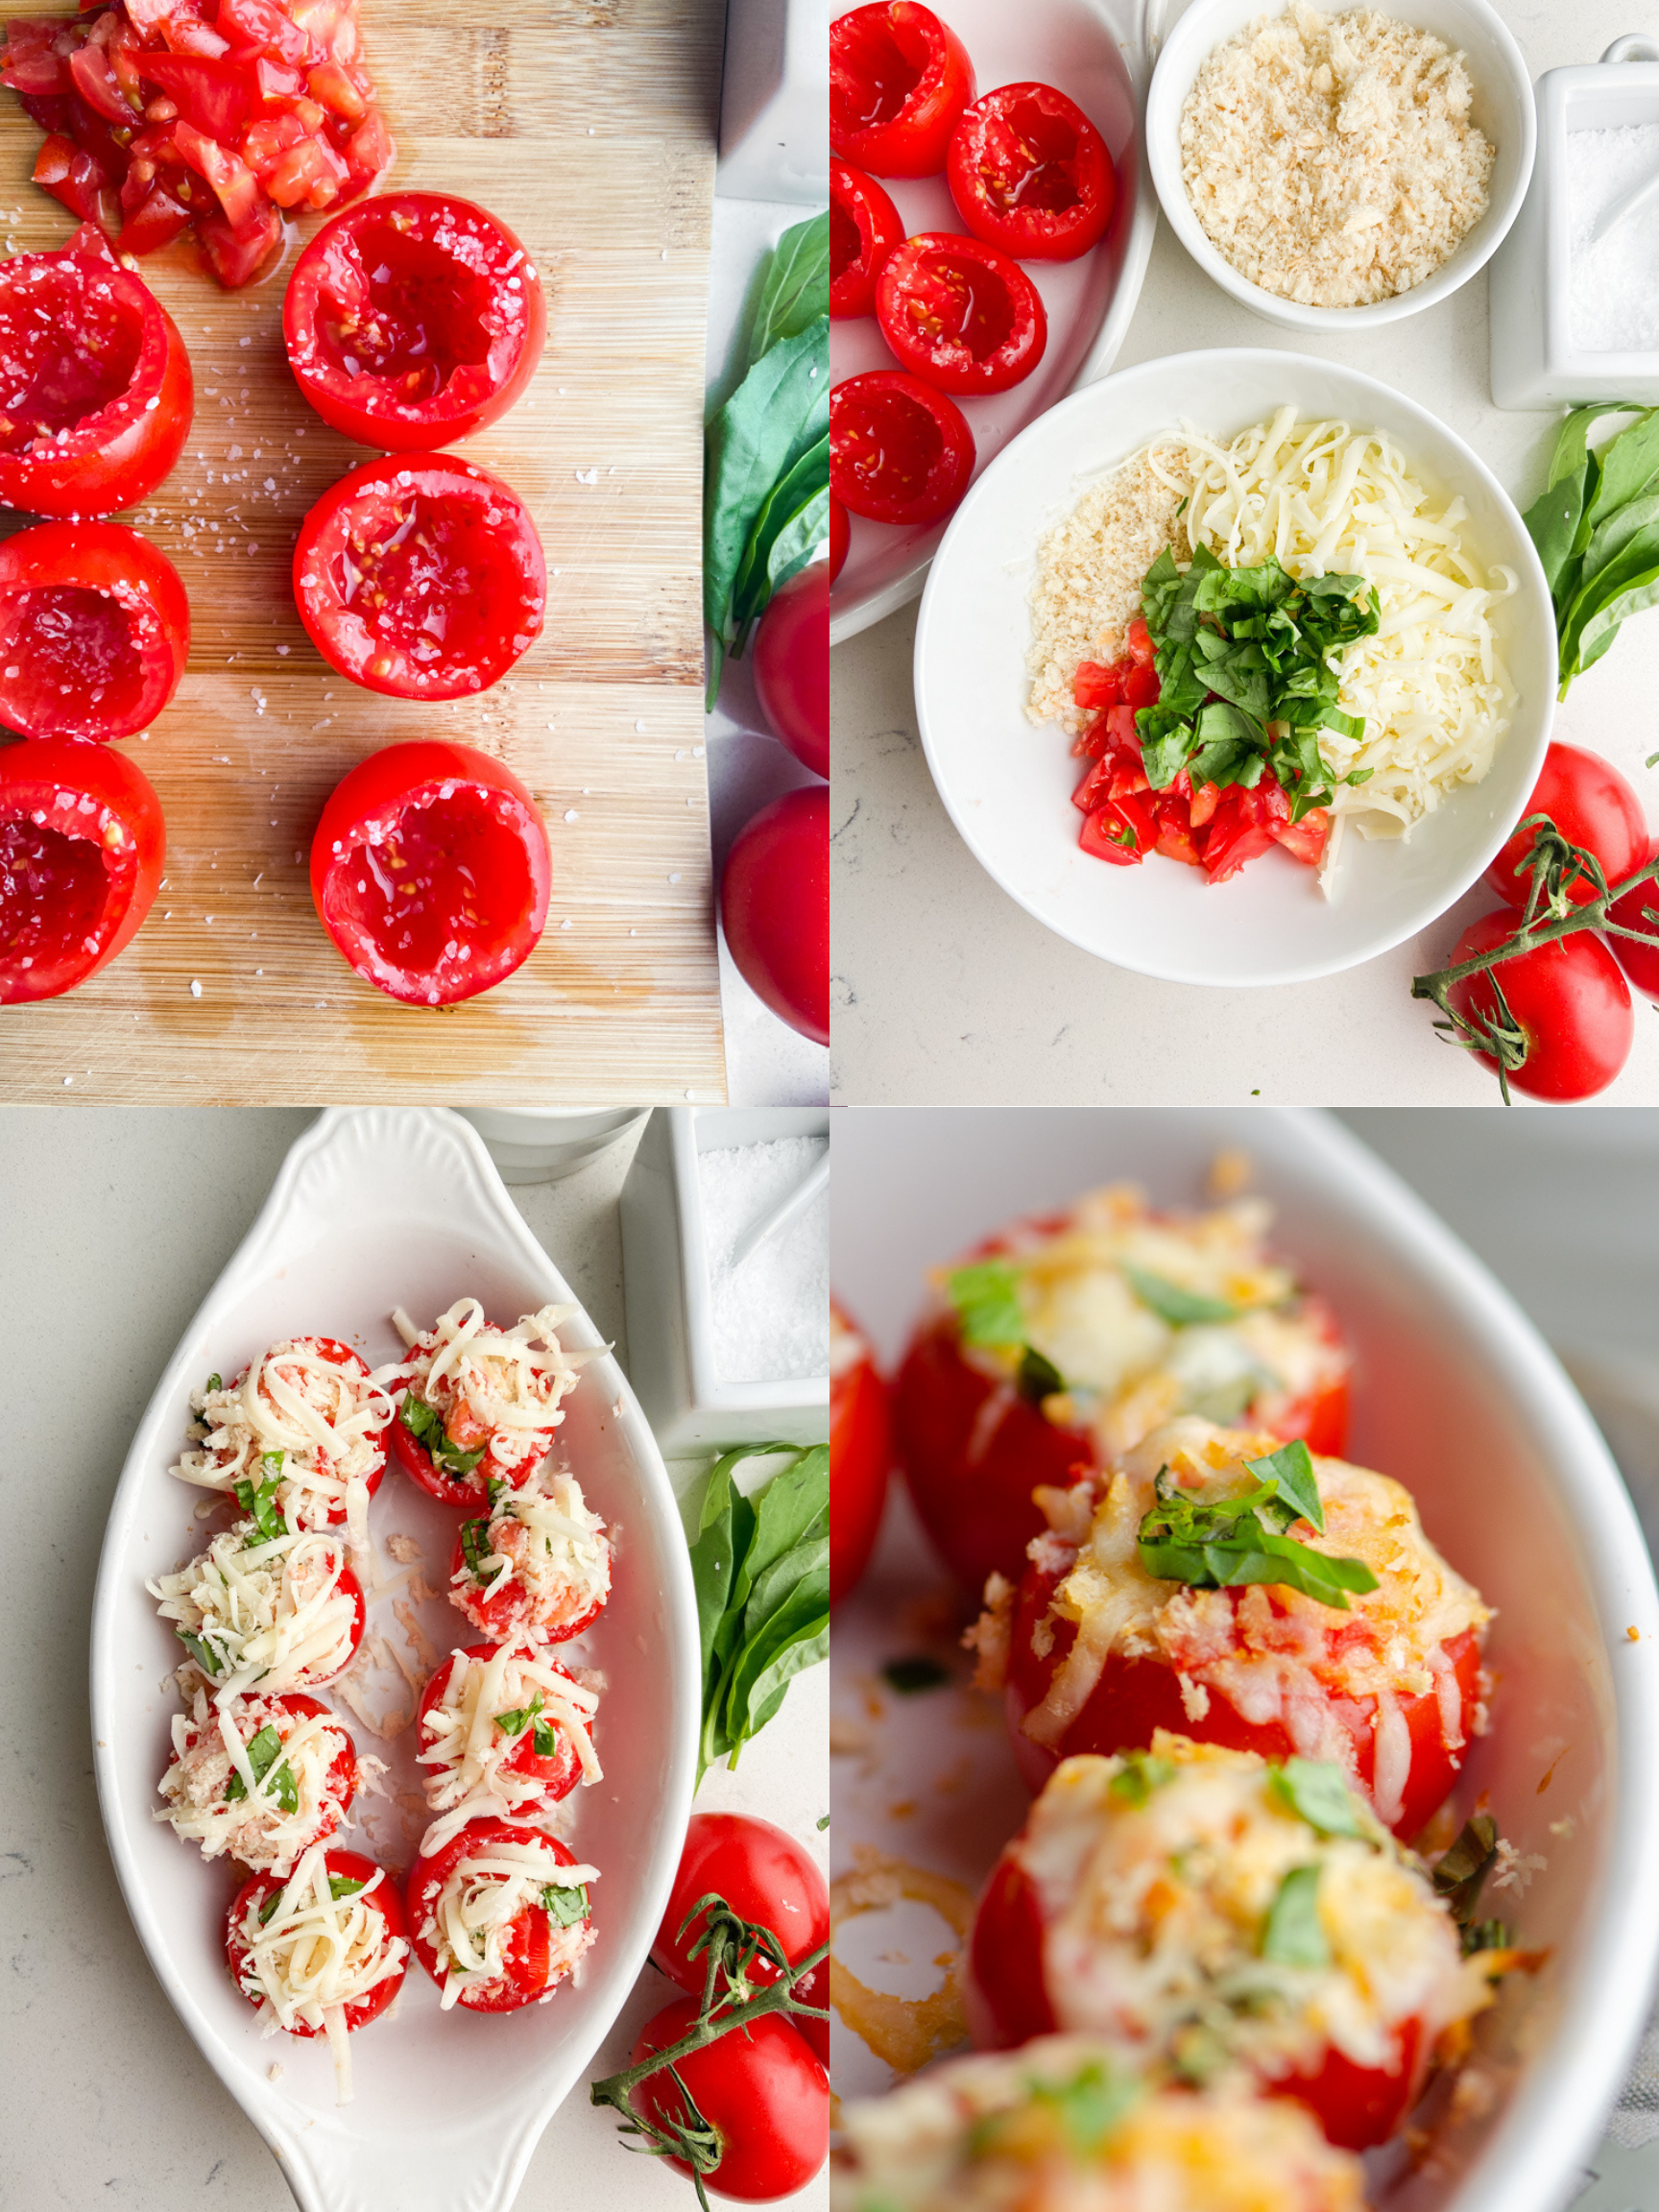 Step by step photos showing how to make stuffed tomatoes. 